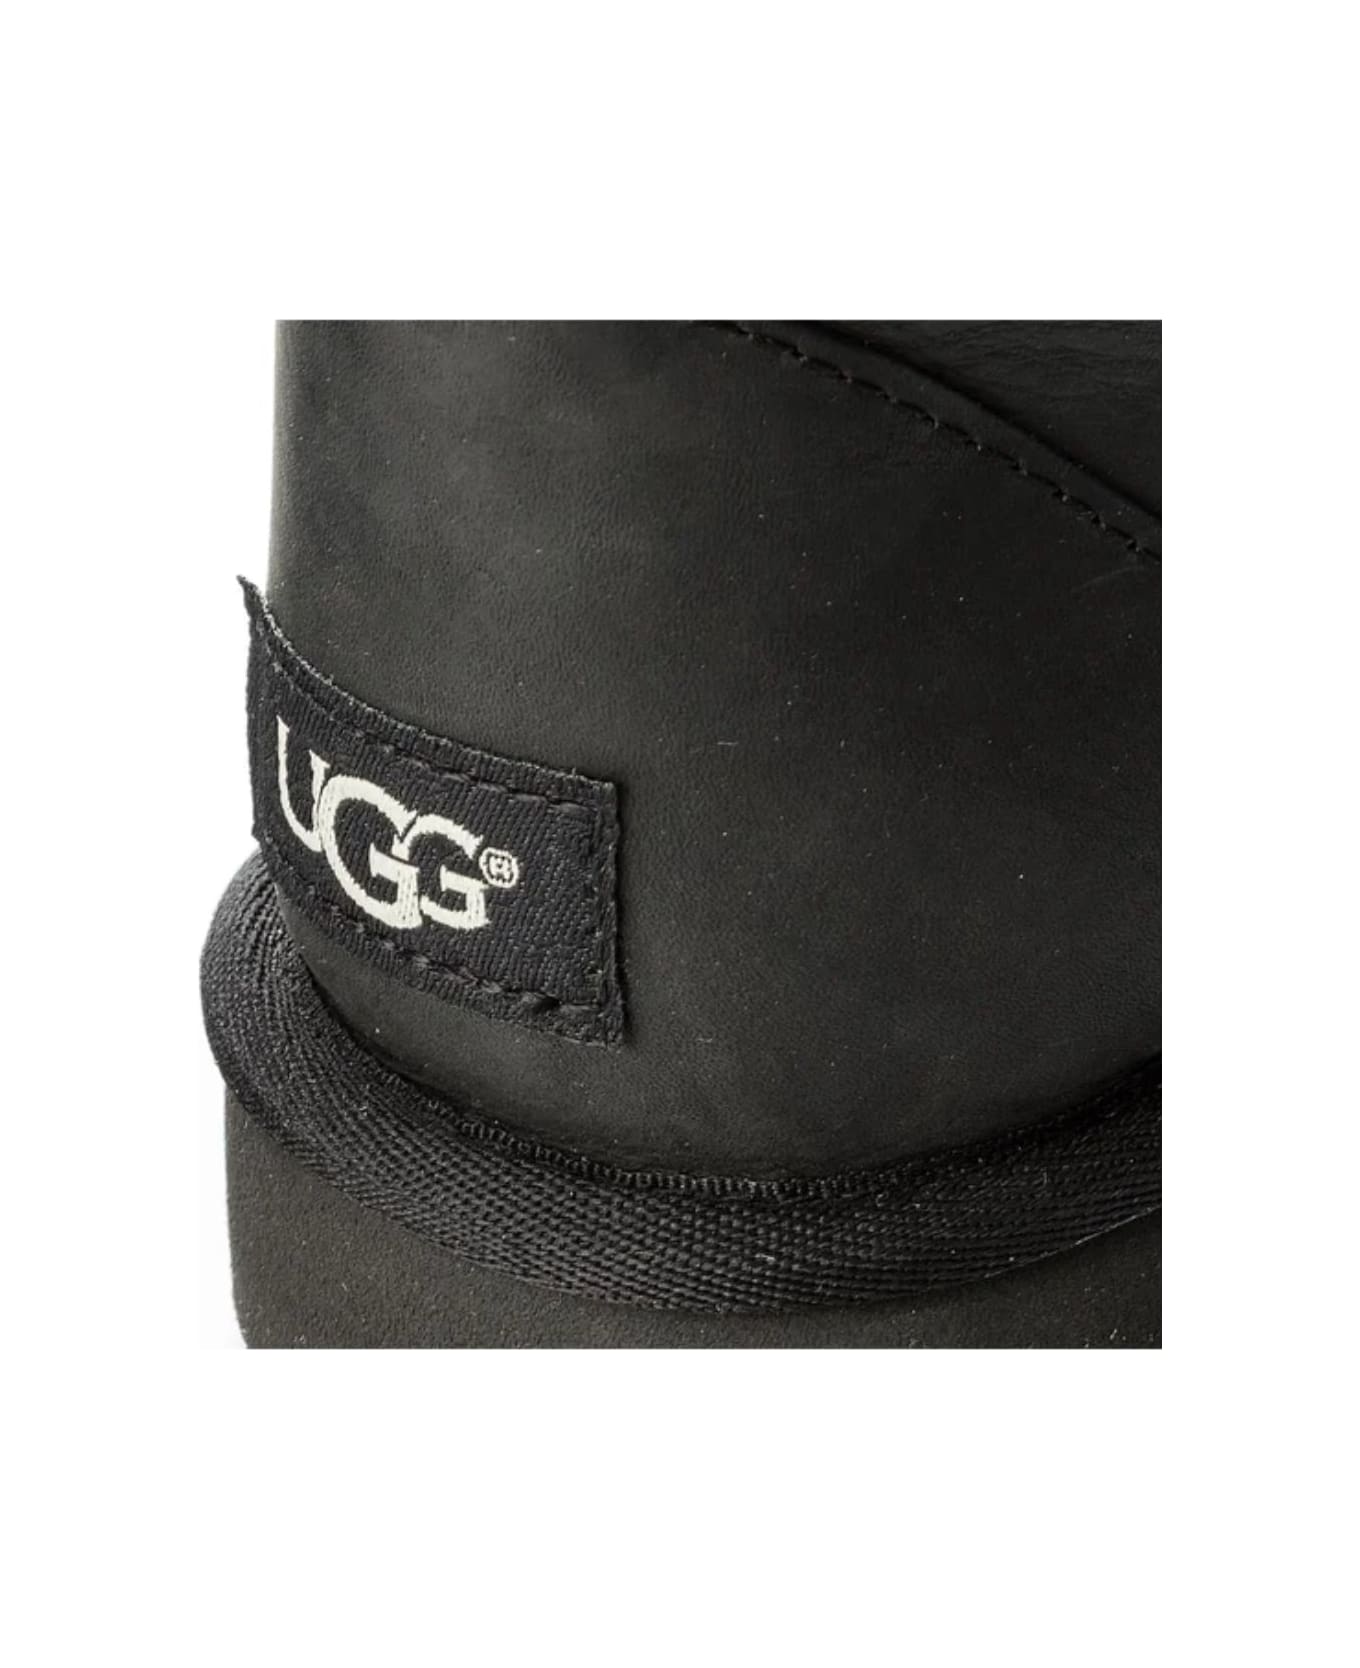 UGG W Classic Short Leather Shoes - Blk Black ブーツ